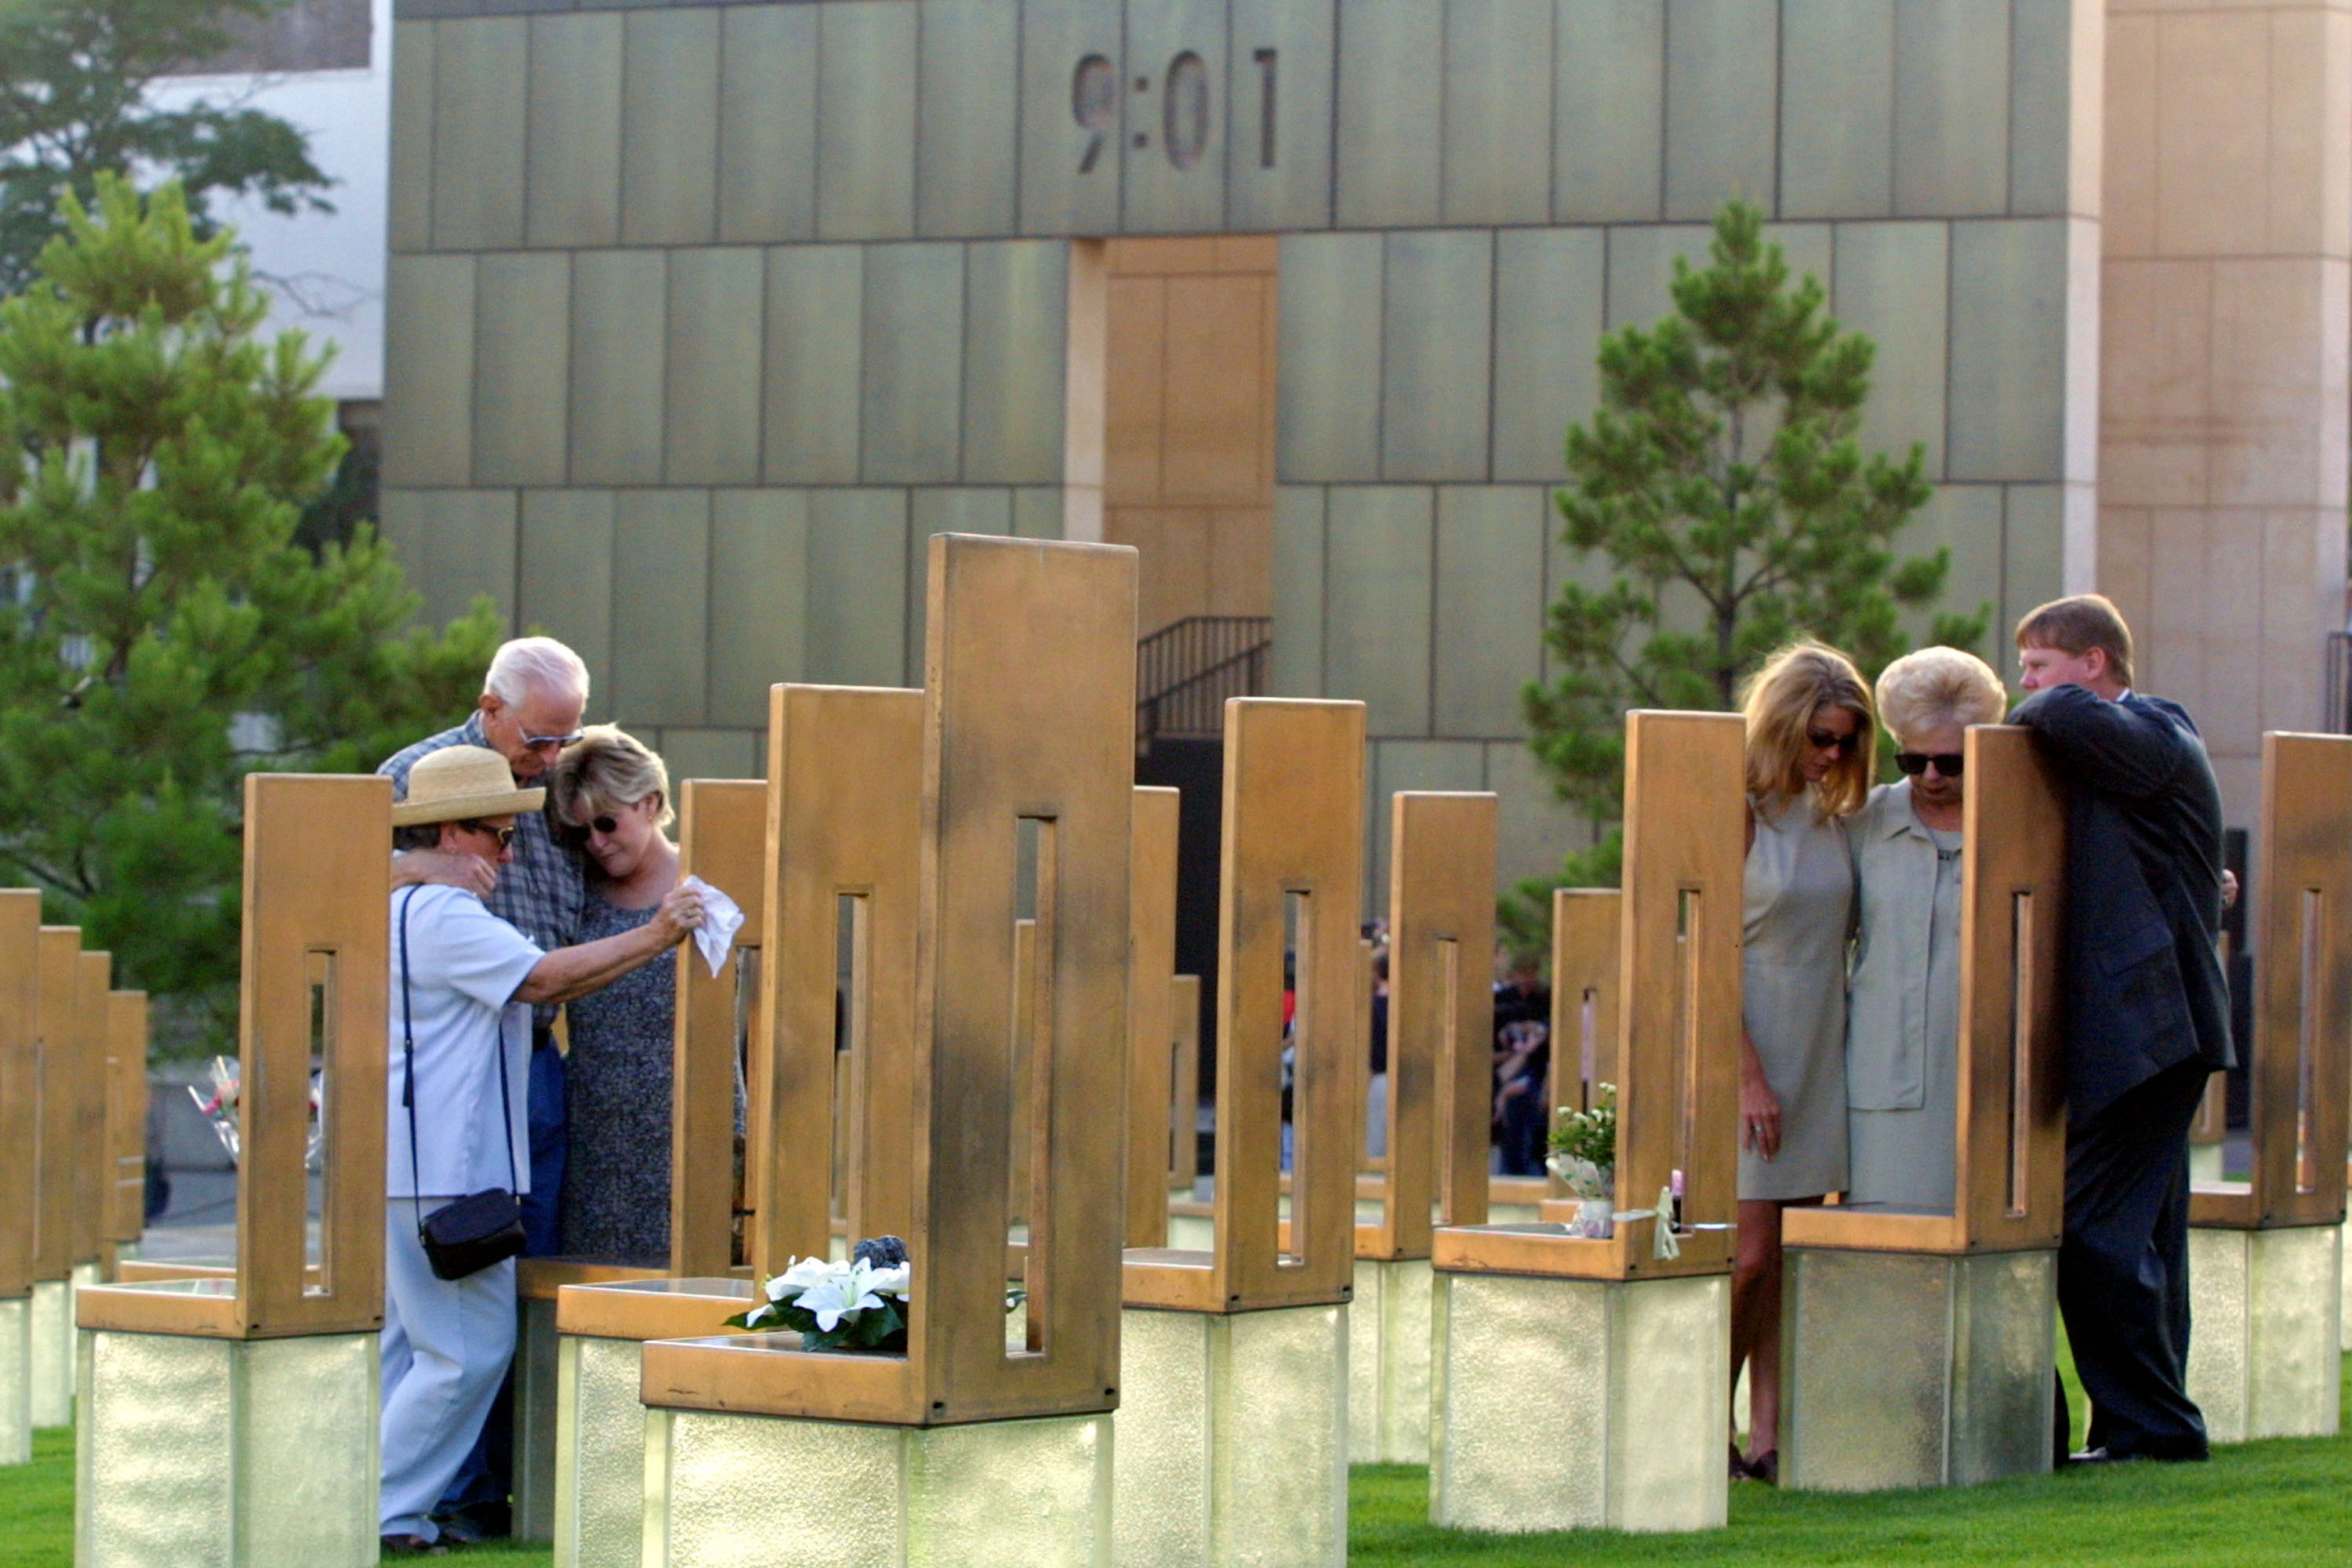 Mourners gather at the Oklahoma City National Memorial around chairs representing relatives killed during the 1995 bombing, on the day perpetrator Timothy McVeigh was executed, June 11, 2001. On the wall behind them, the time when the bomb was detonated is recorded at 9:01. (Joe Raedle/Getty Images)